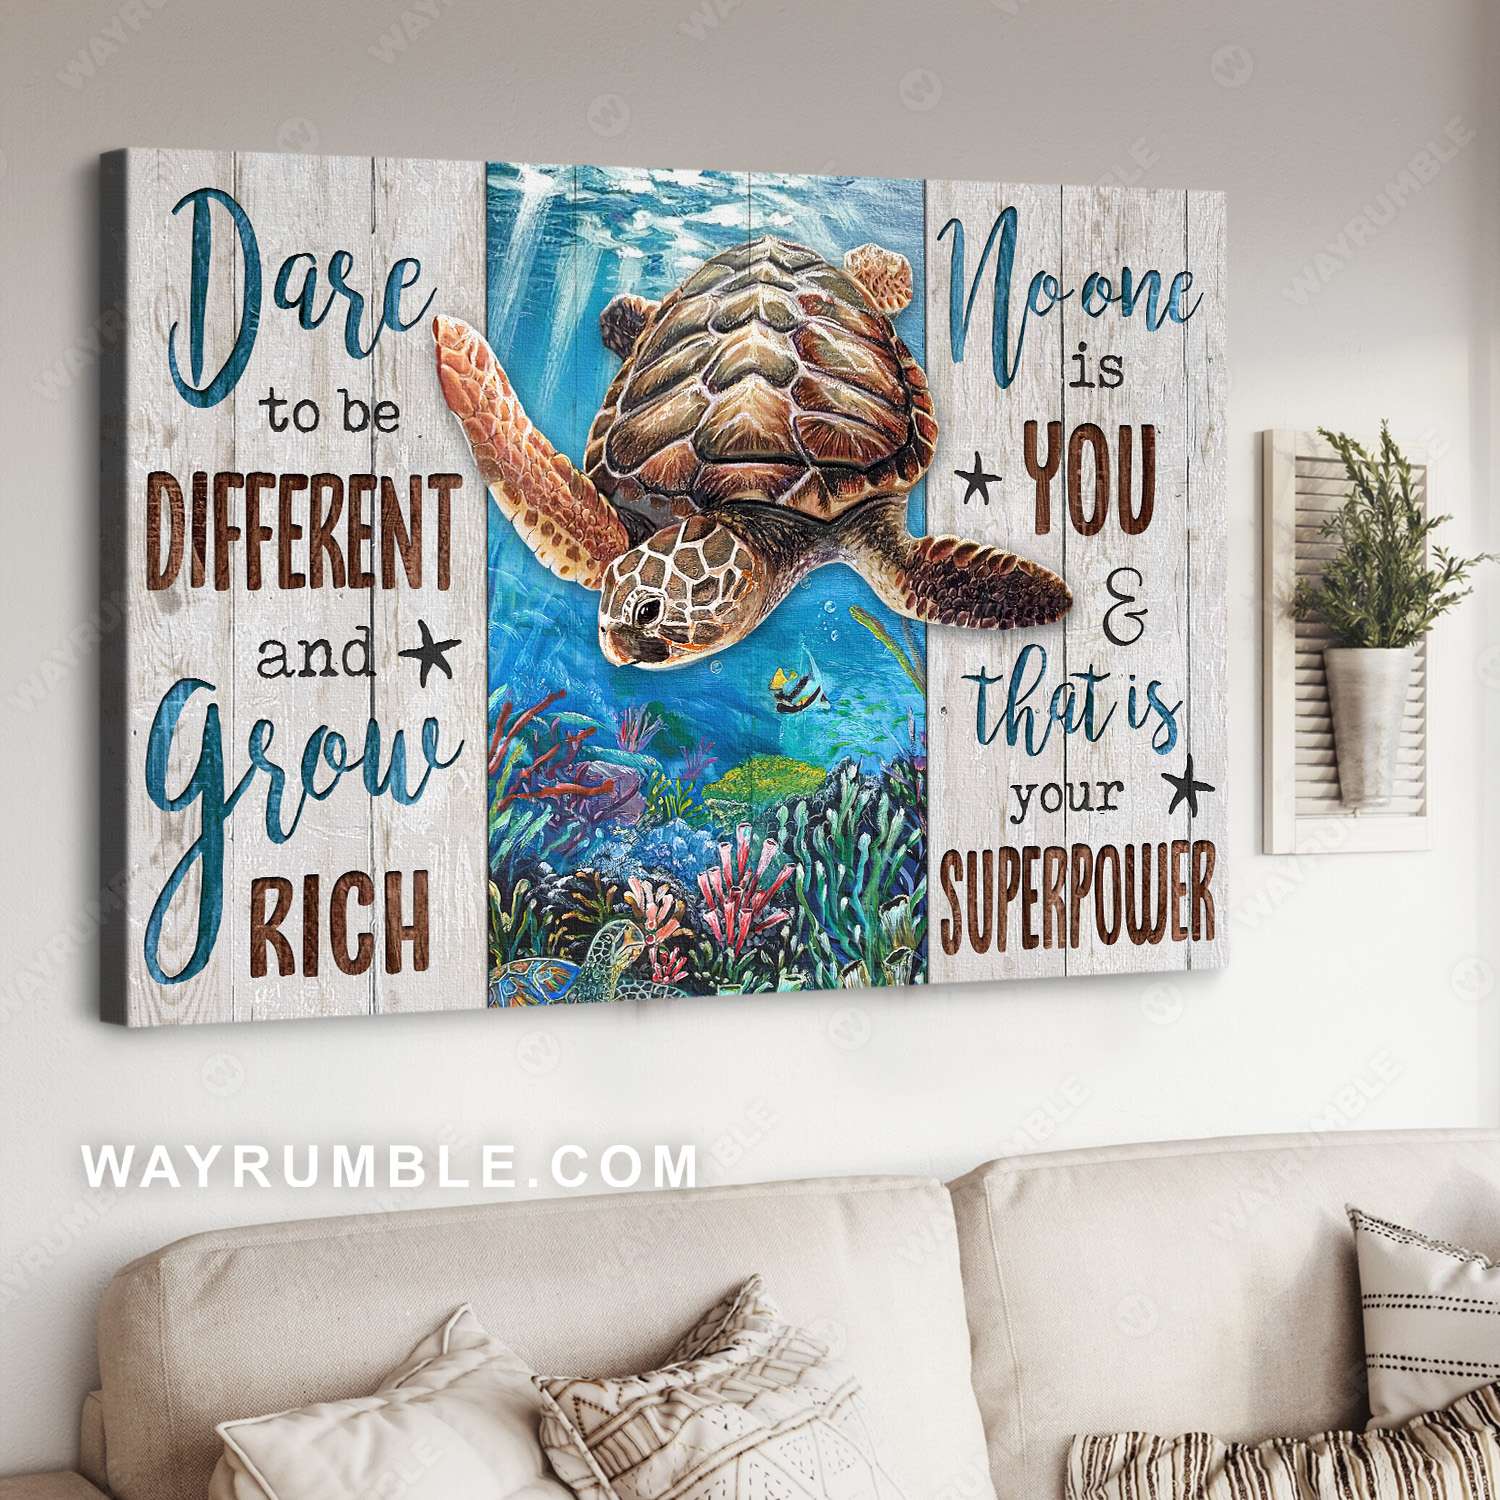 Sea turtle, Under the ocean, No one is you - Family Landscape Canvas Prints, Wall Art